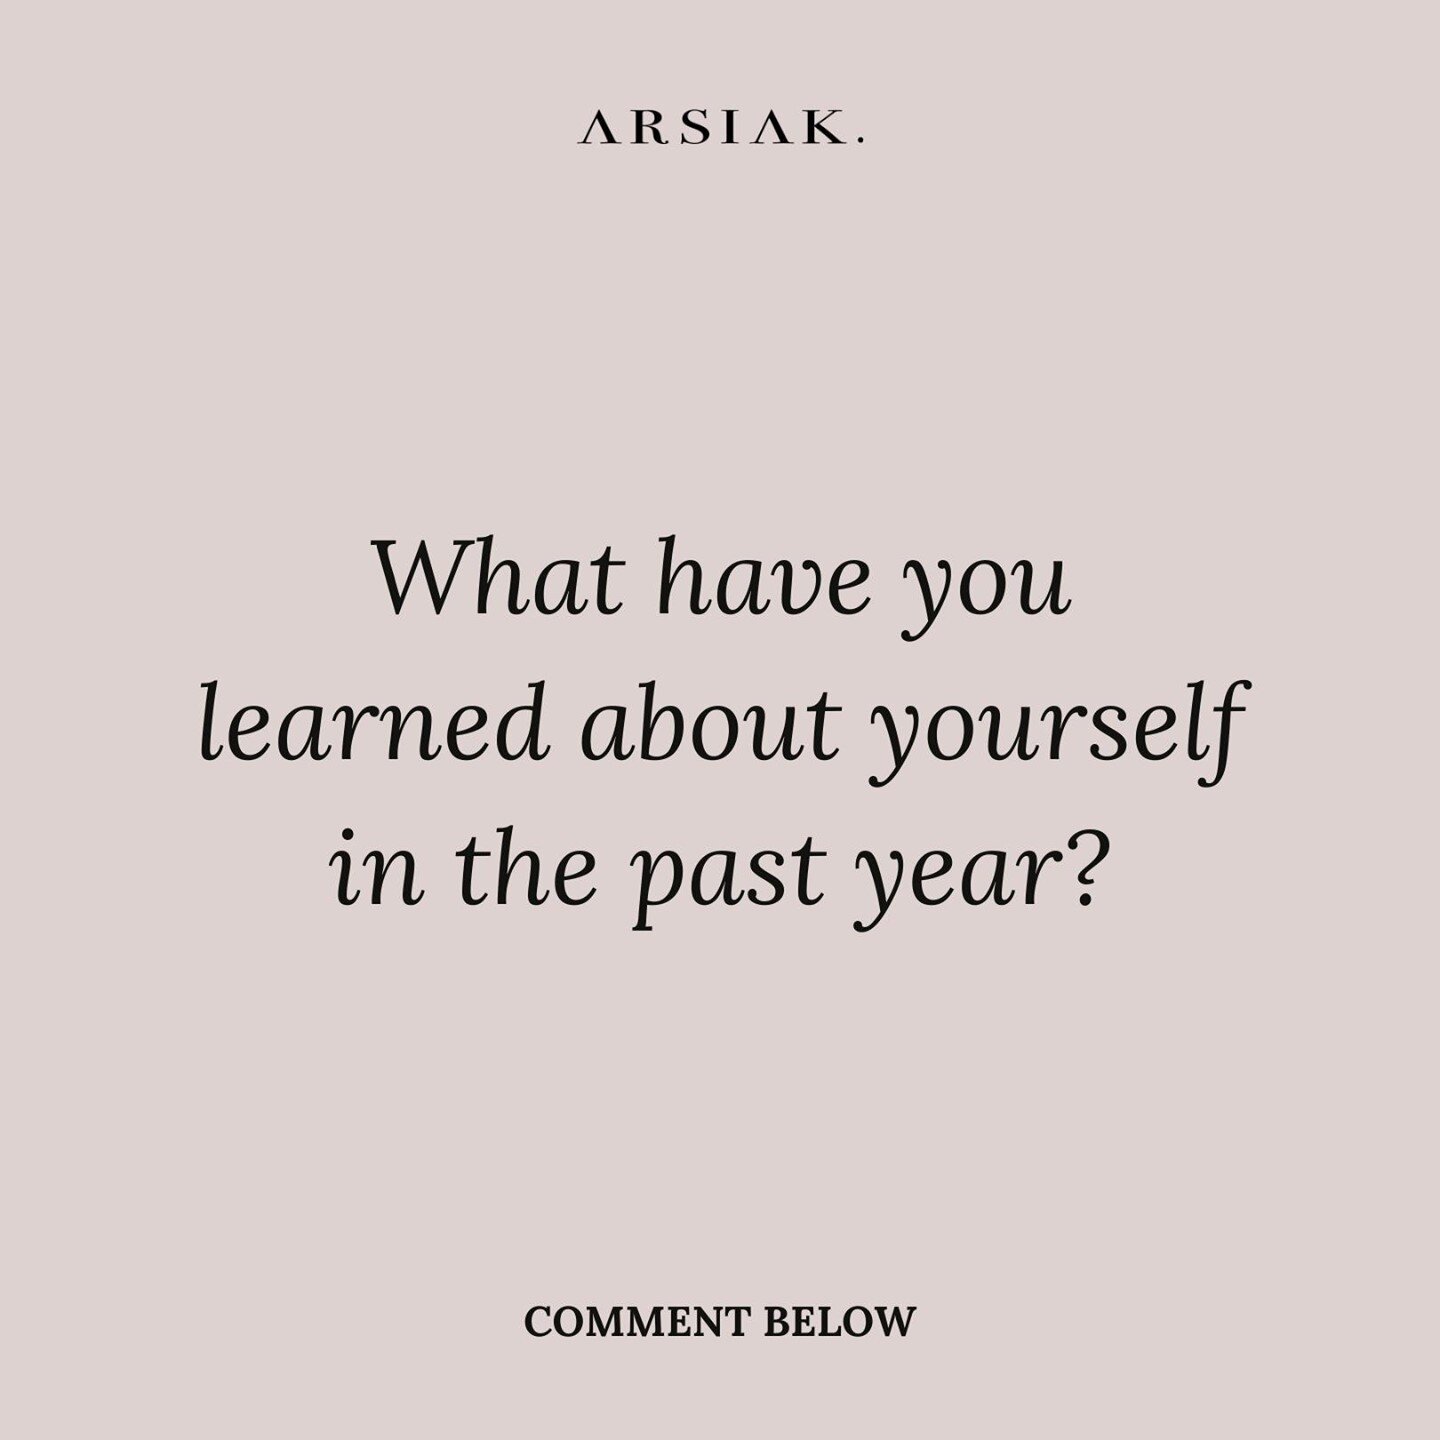 The past year has been nothing shy of a whirlwind. So many changes in our lives have forced us to reflect and assimilate things about ourselves that we may have known otherwise! You pushed through, maybe you found a new passion, you found new strengt